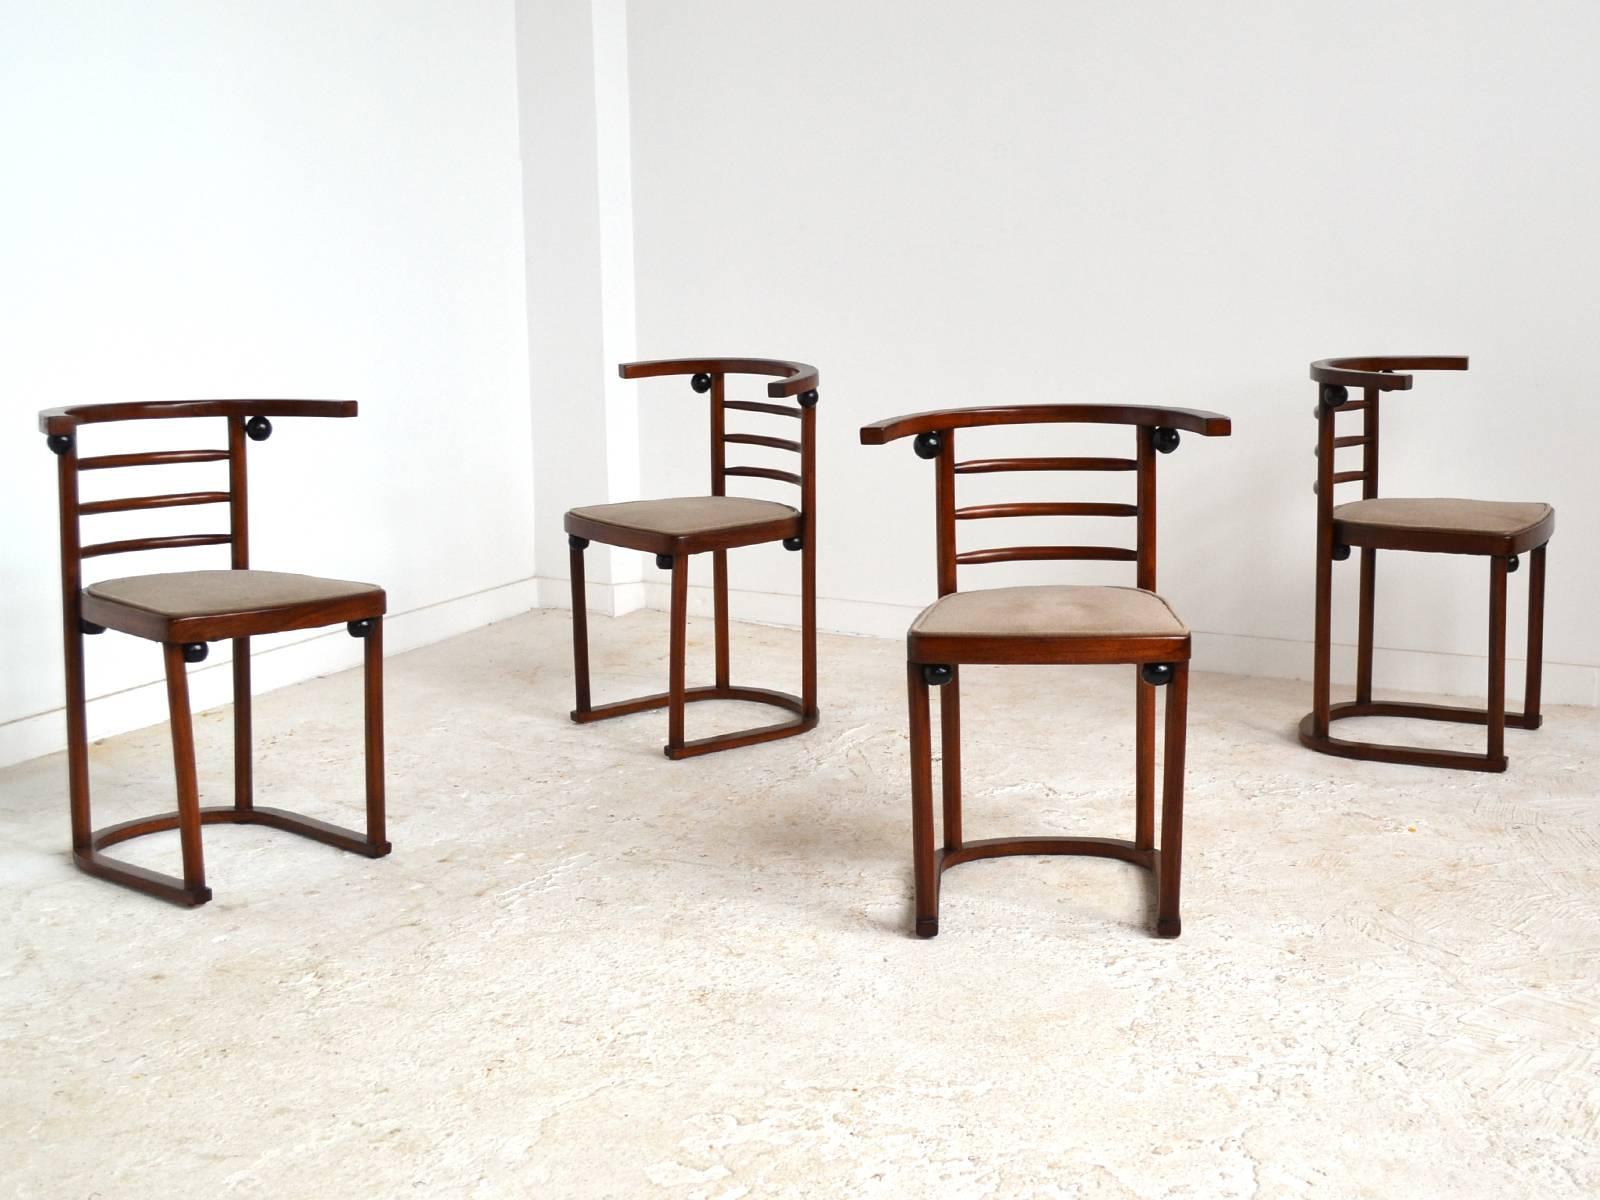 Originally designed by Joseph Hoffman for the Café Fledermaus in 1907, this set of four chairs was made by Thonet. The frames of stained and ebonized beech have seats upholstered in mohair.